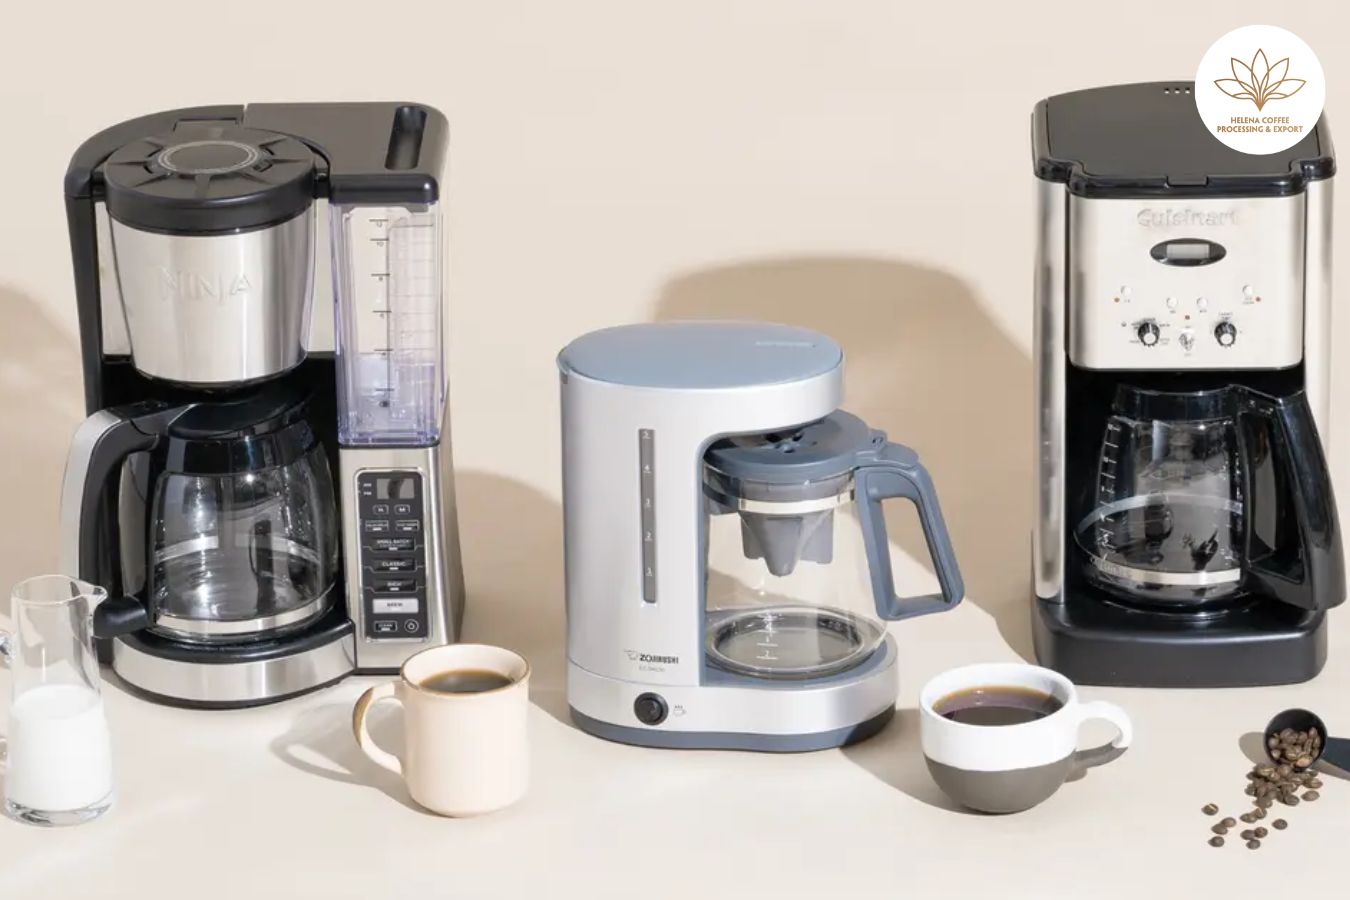 Considerations Before Purchasing An RV Coffee Maker